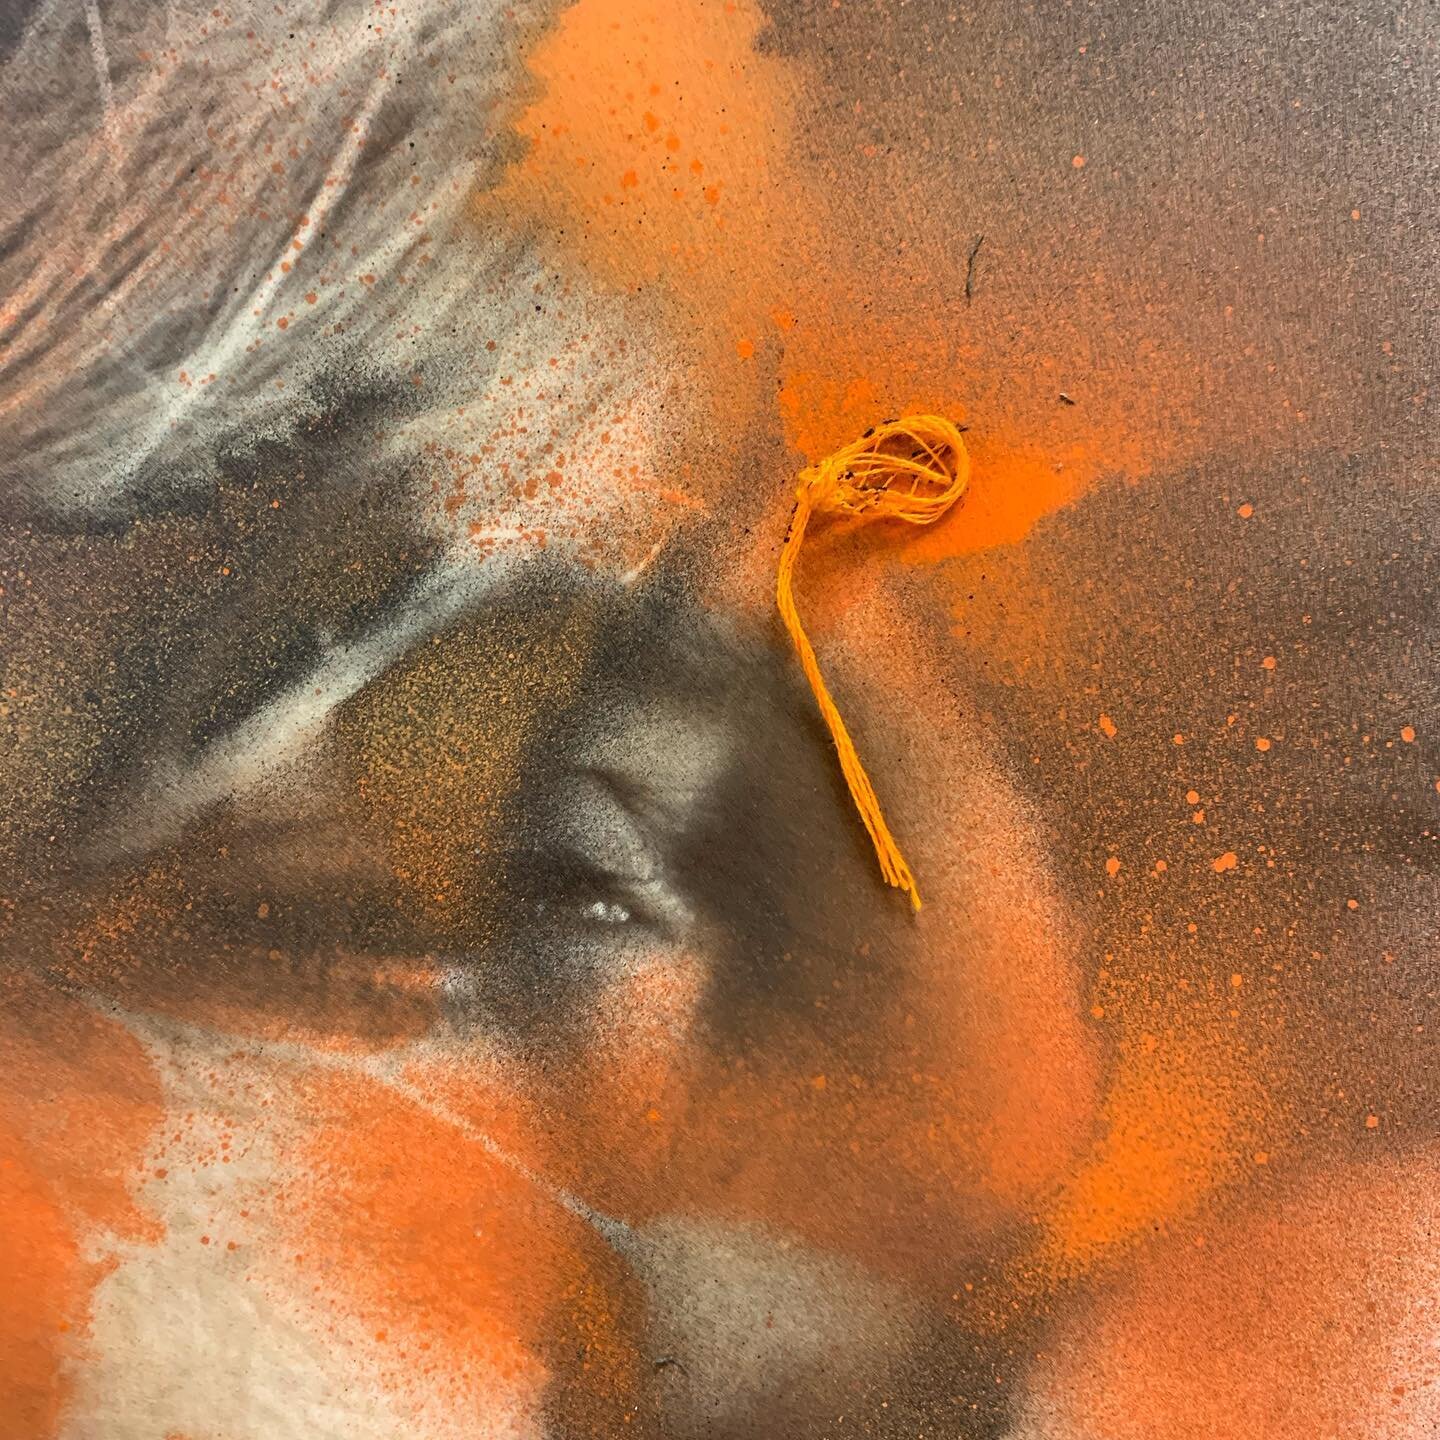 -Orange construction spray paint,
-Charcoal,
-Embroidery thread, 
all on top of a 24&rdquo; photographic print!!!!!!!!!
.
TAKE THAT INKJET PRINT!!!😂😂😂😉
.
.
.
.
@crafhouston @hcponline #contemporaryart #portraitphotography #portraiture #performanc